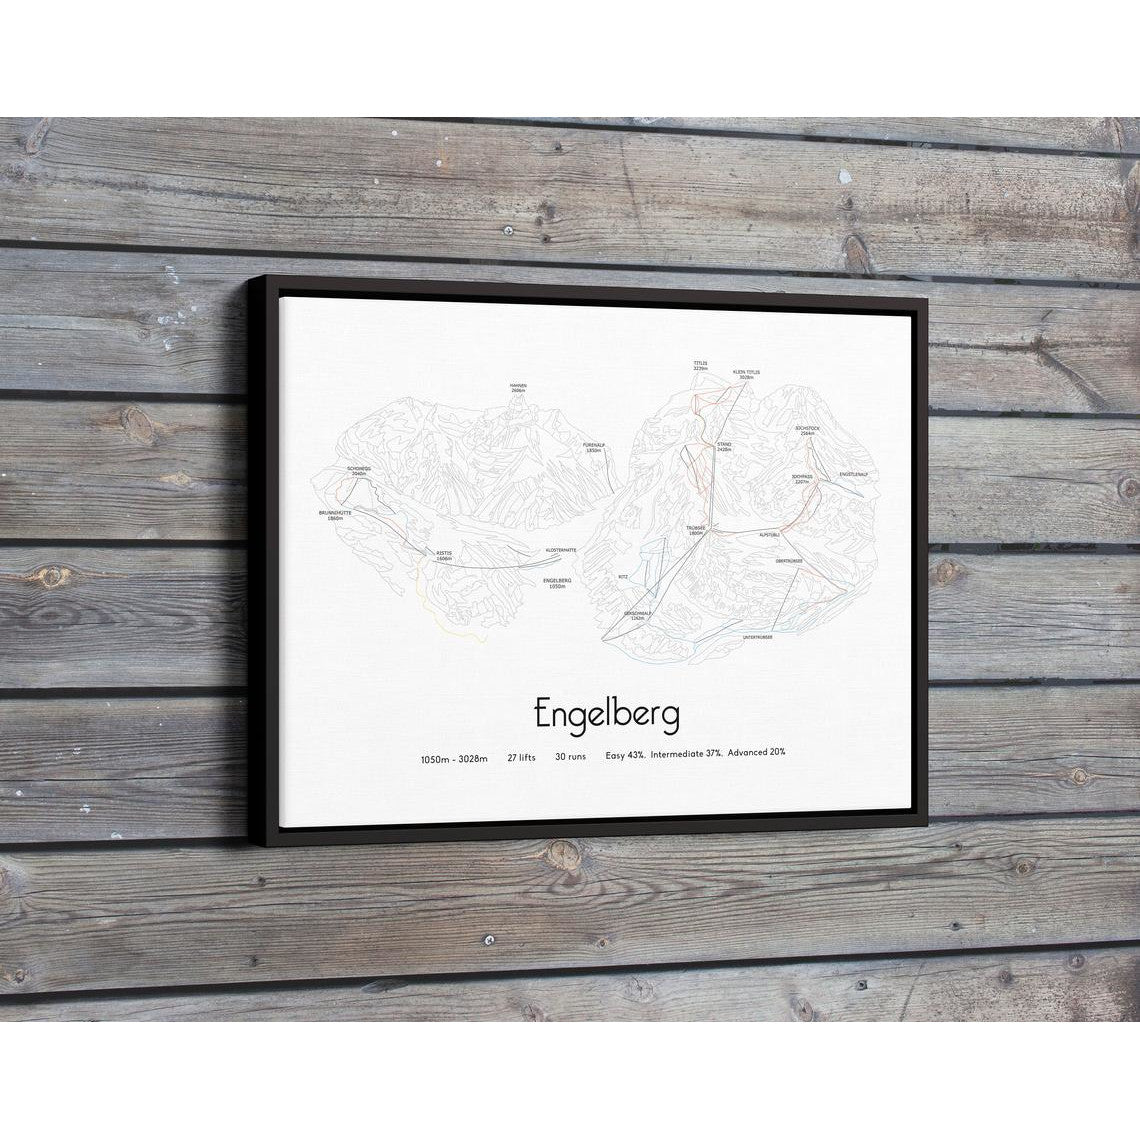 Engelberg Piste Map Wall Print Poster | Backcountry Books | Bluebell and Moss